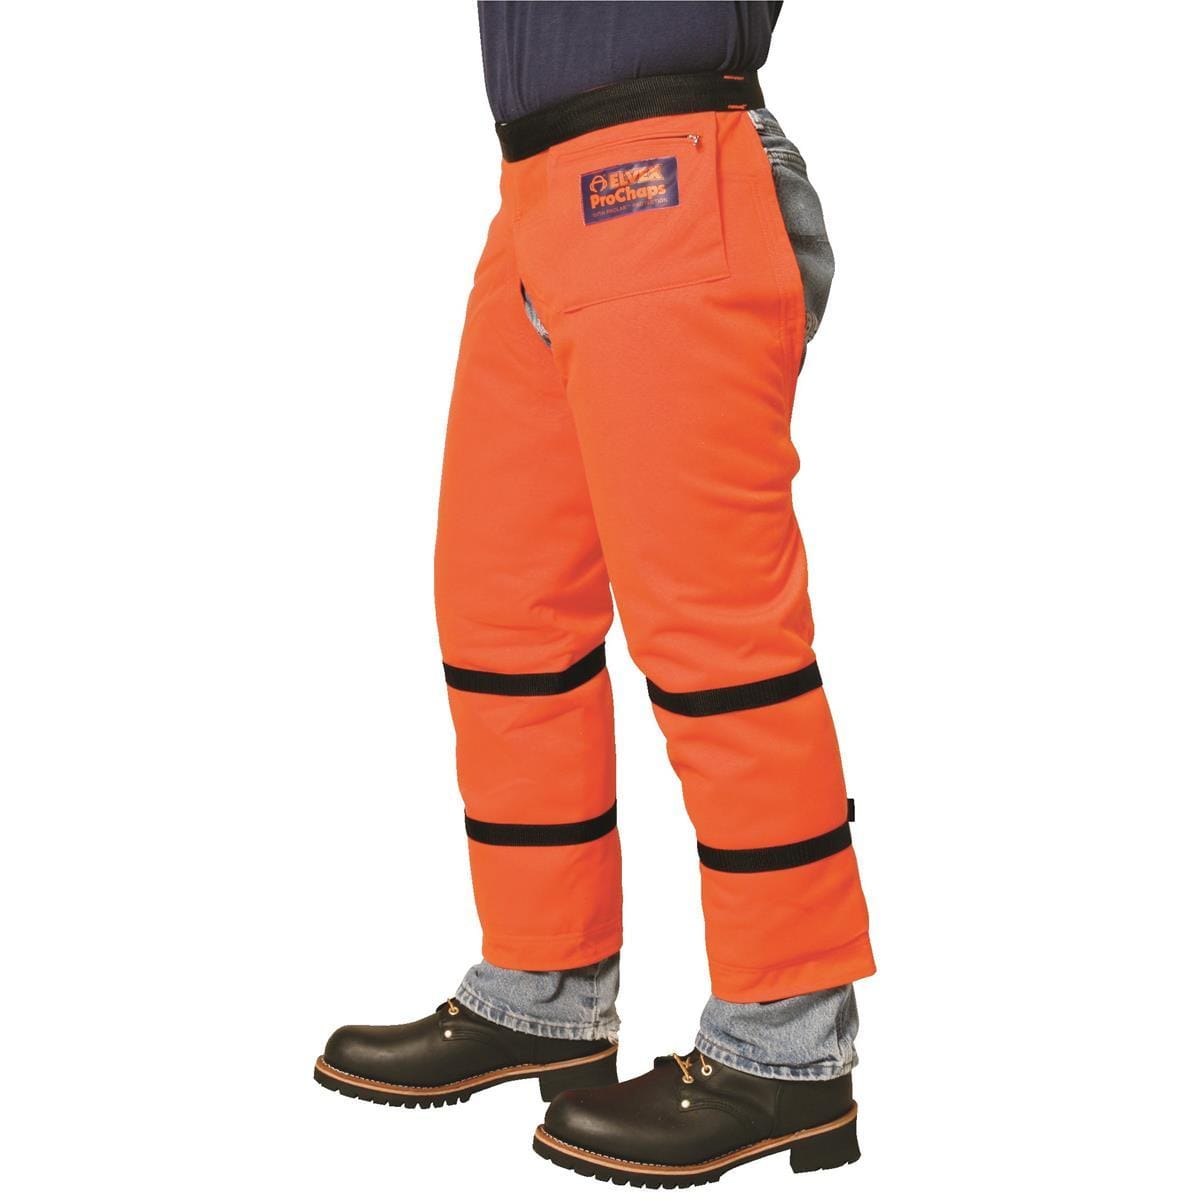 91 Series Chain Saw Safety Chaps